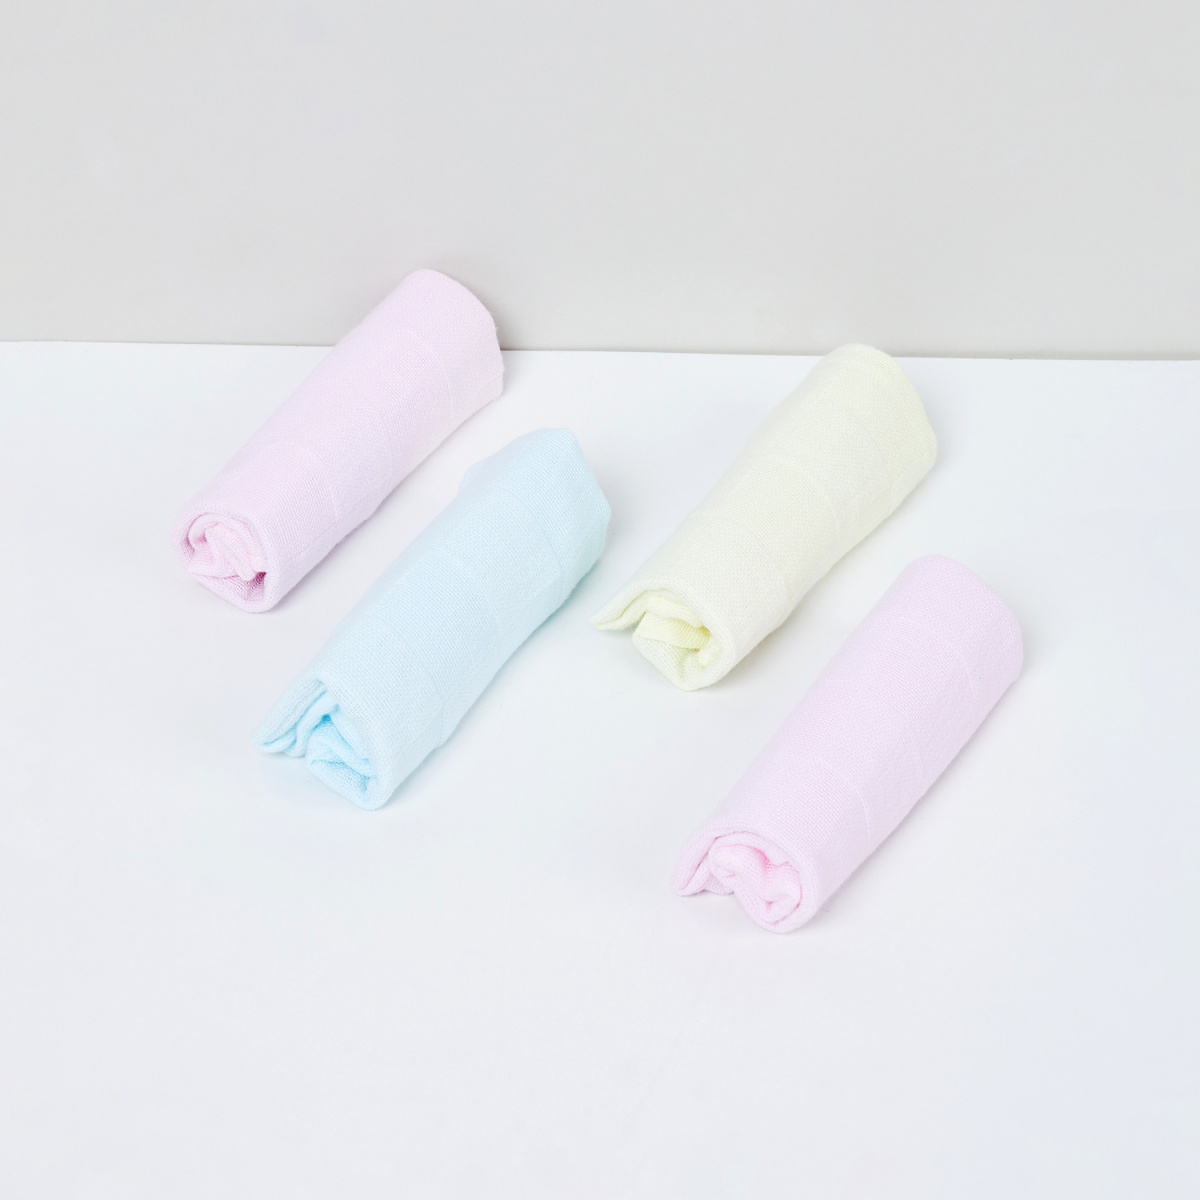 MAX Solid Cotton Face Towel - Pack of 4 Pcs.